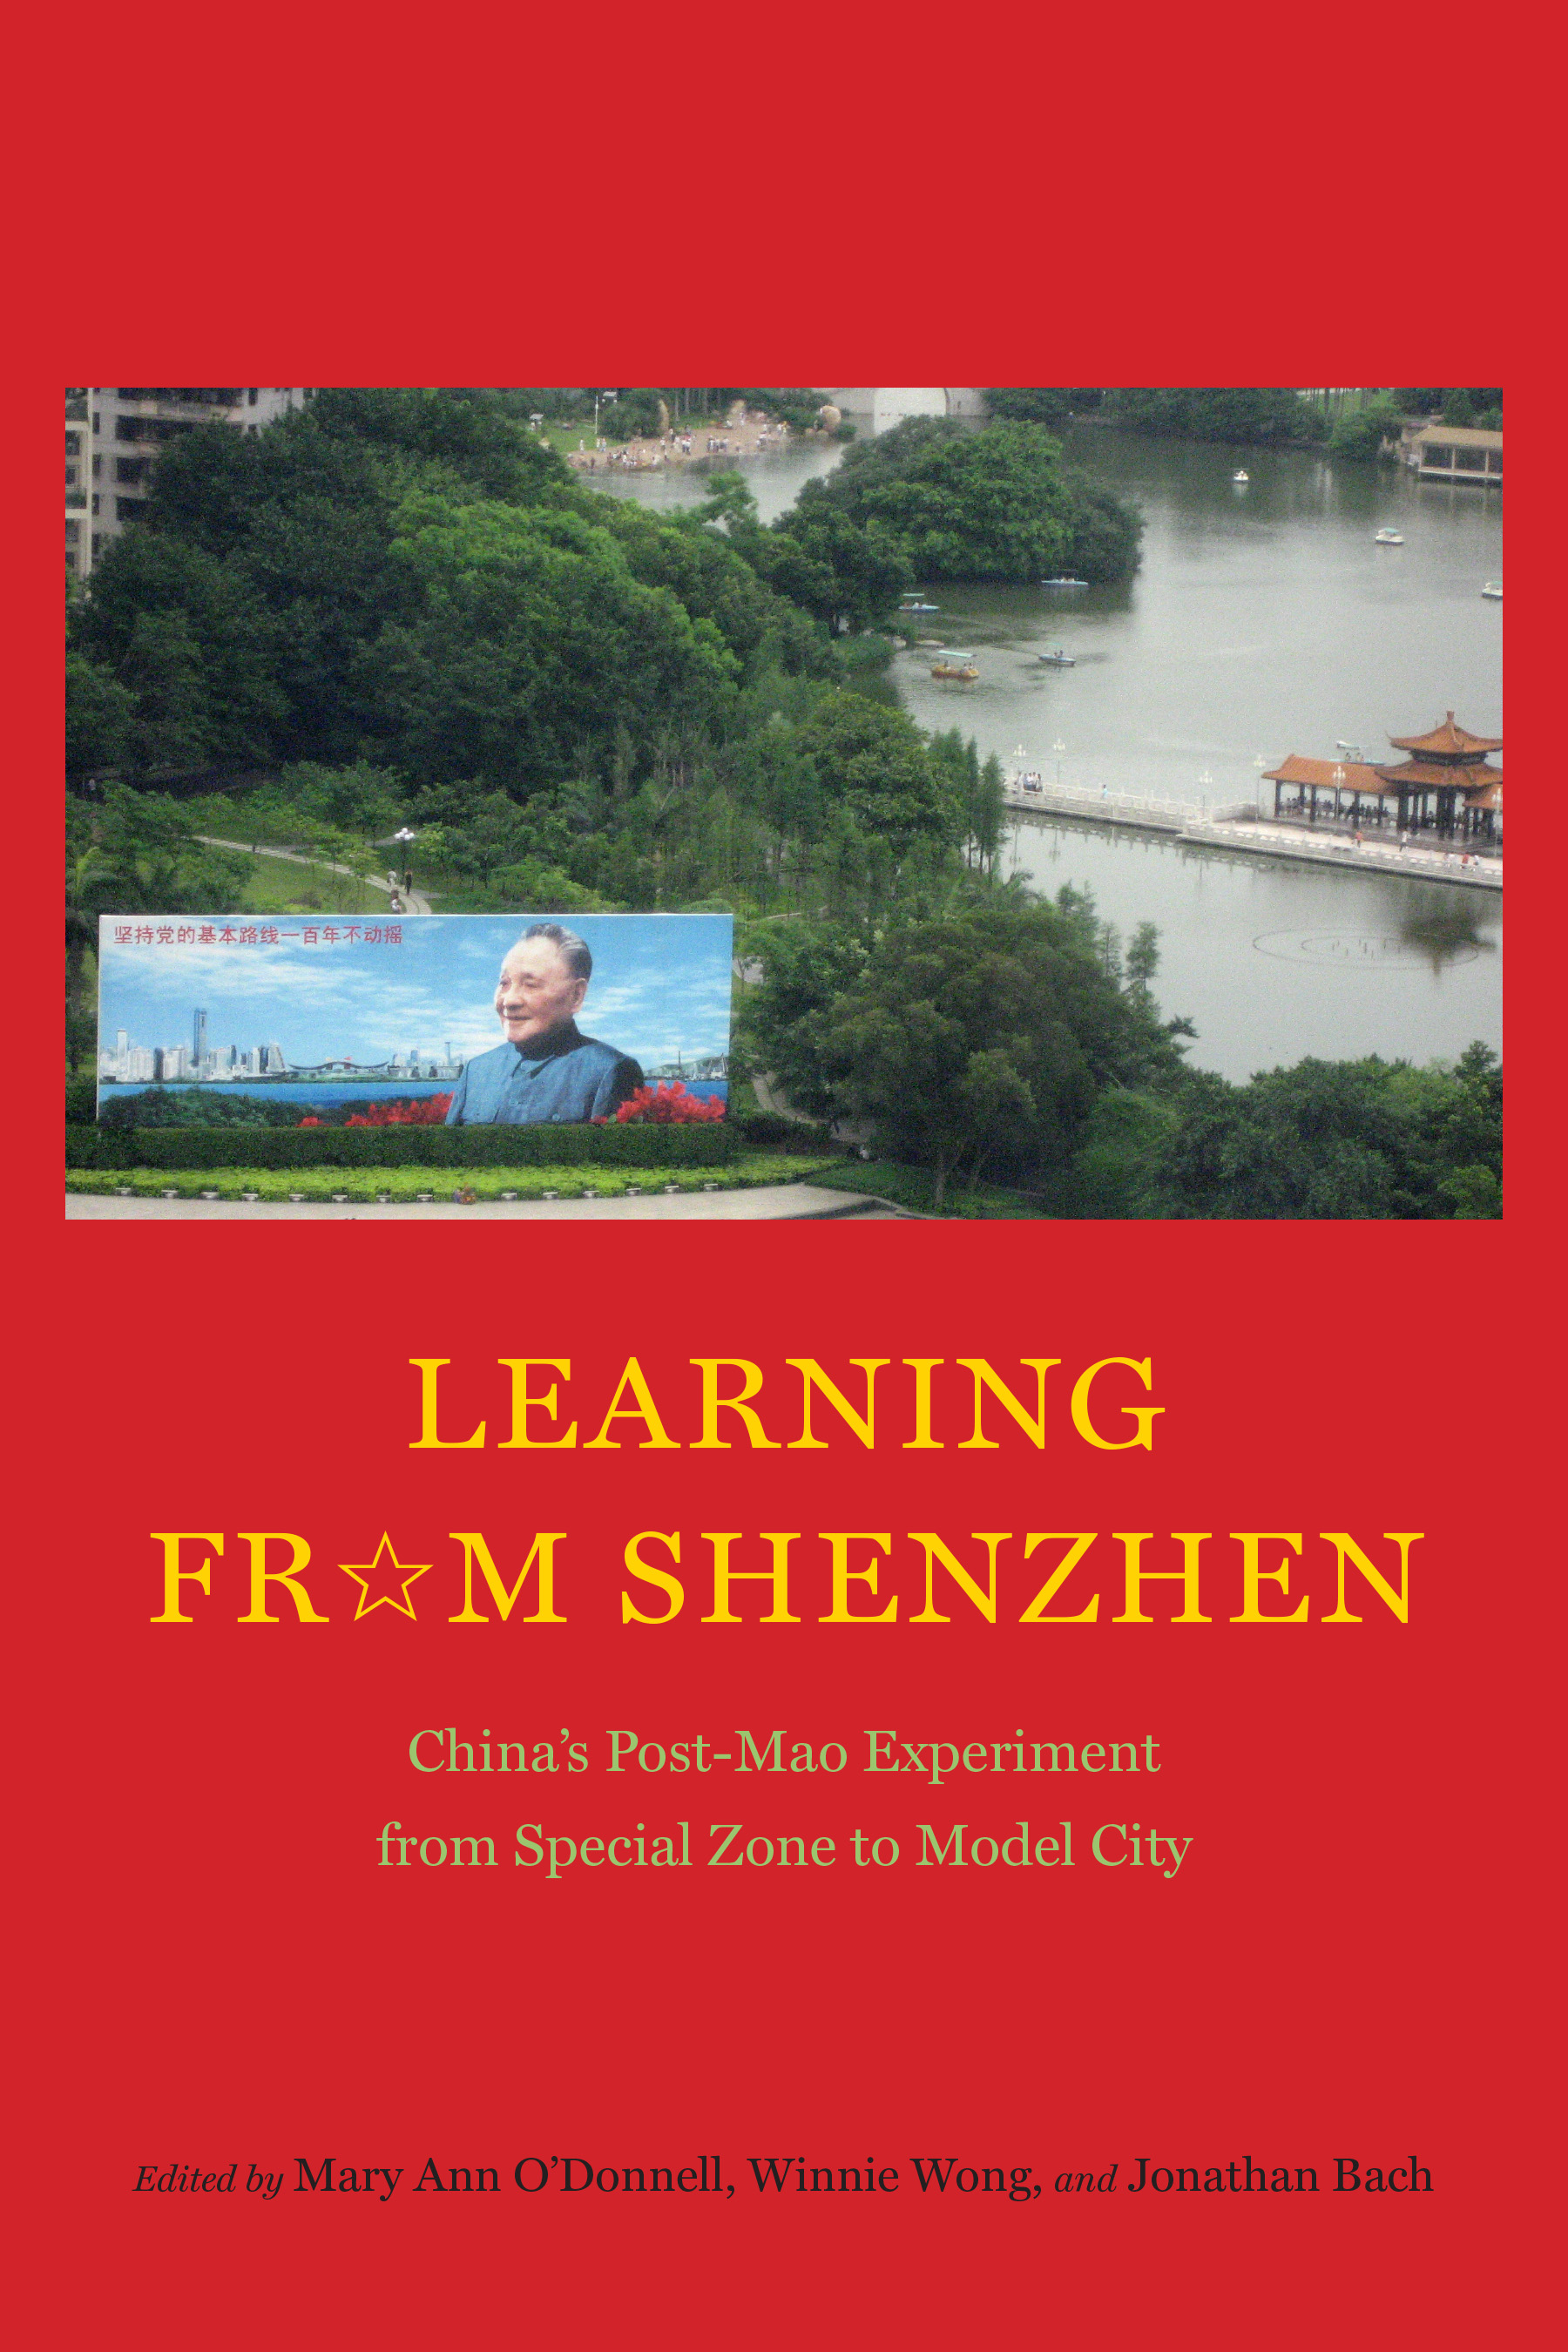 Jonathan Bach’s New Book on China’s Fastest Growing City of Shenzhen